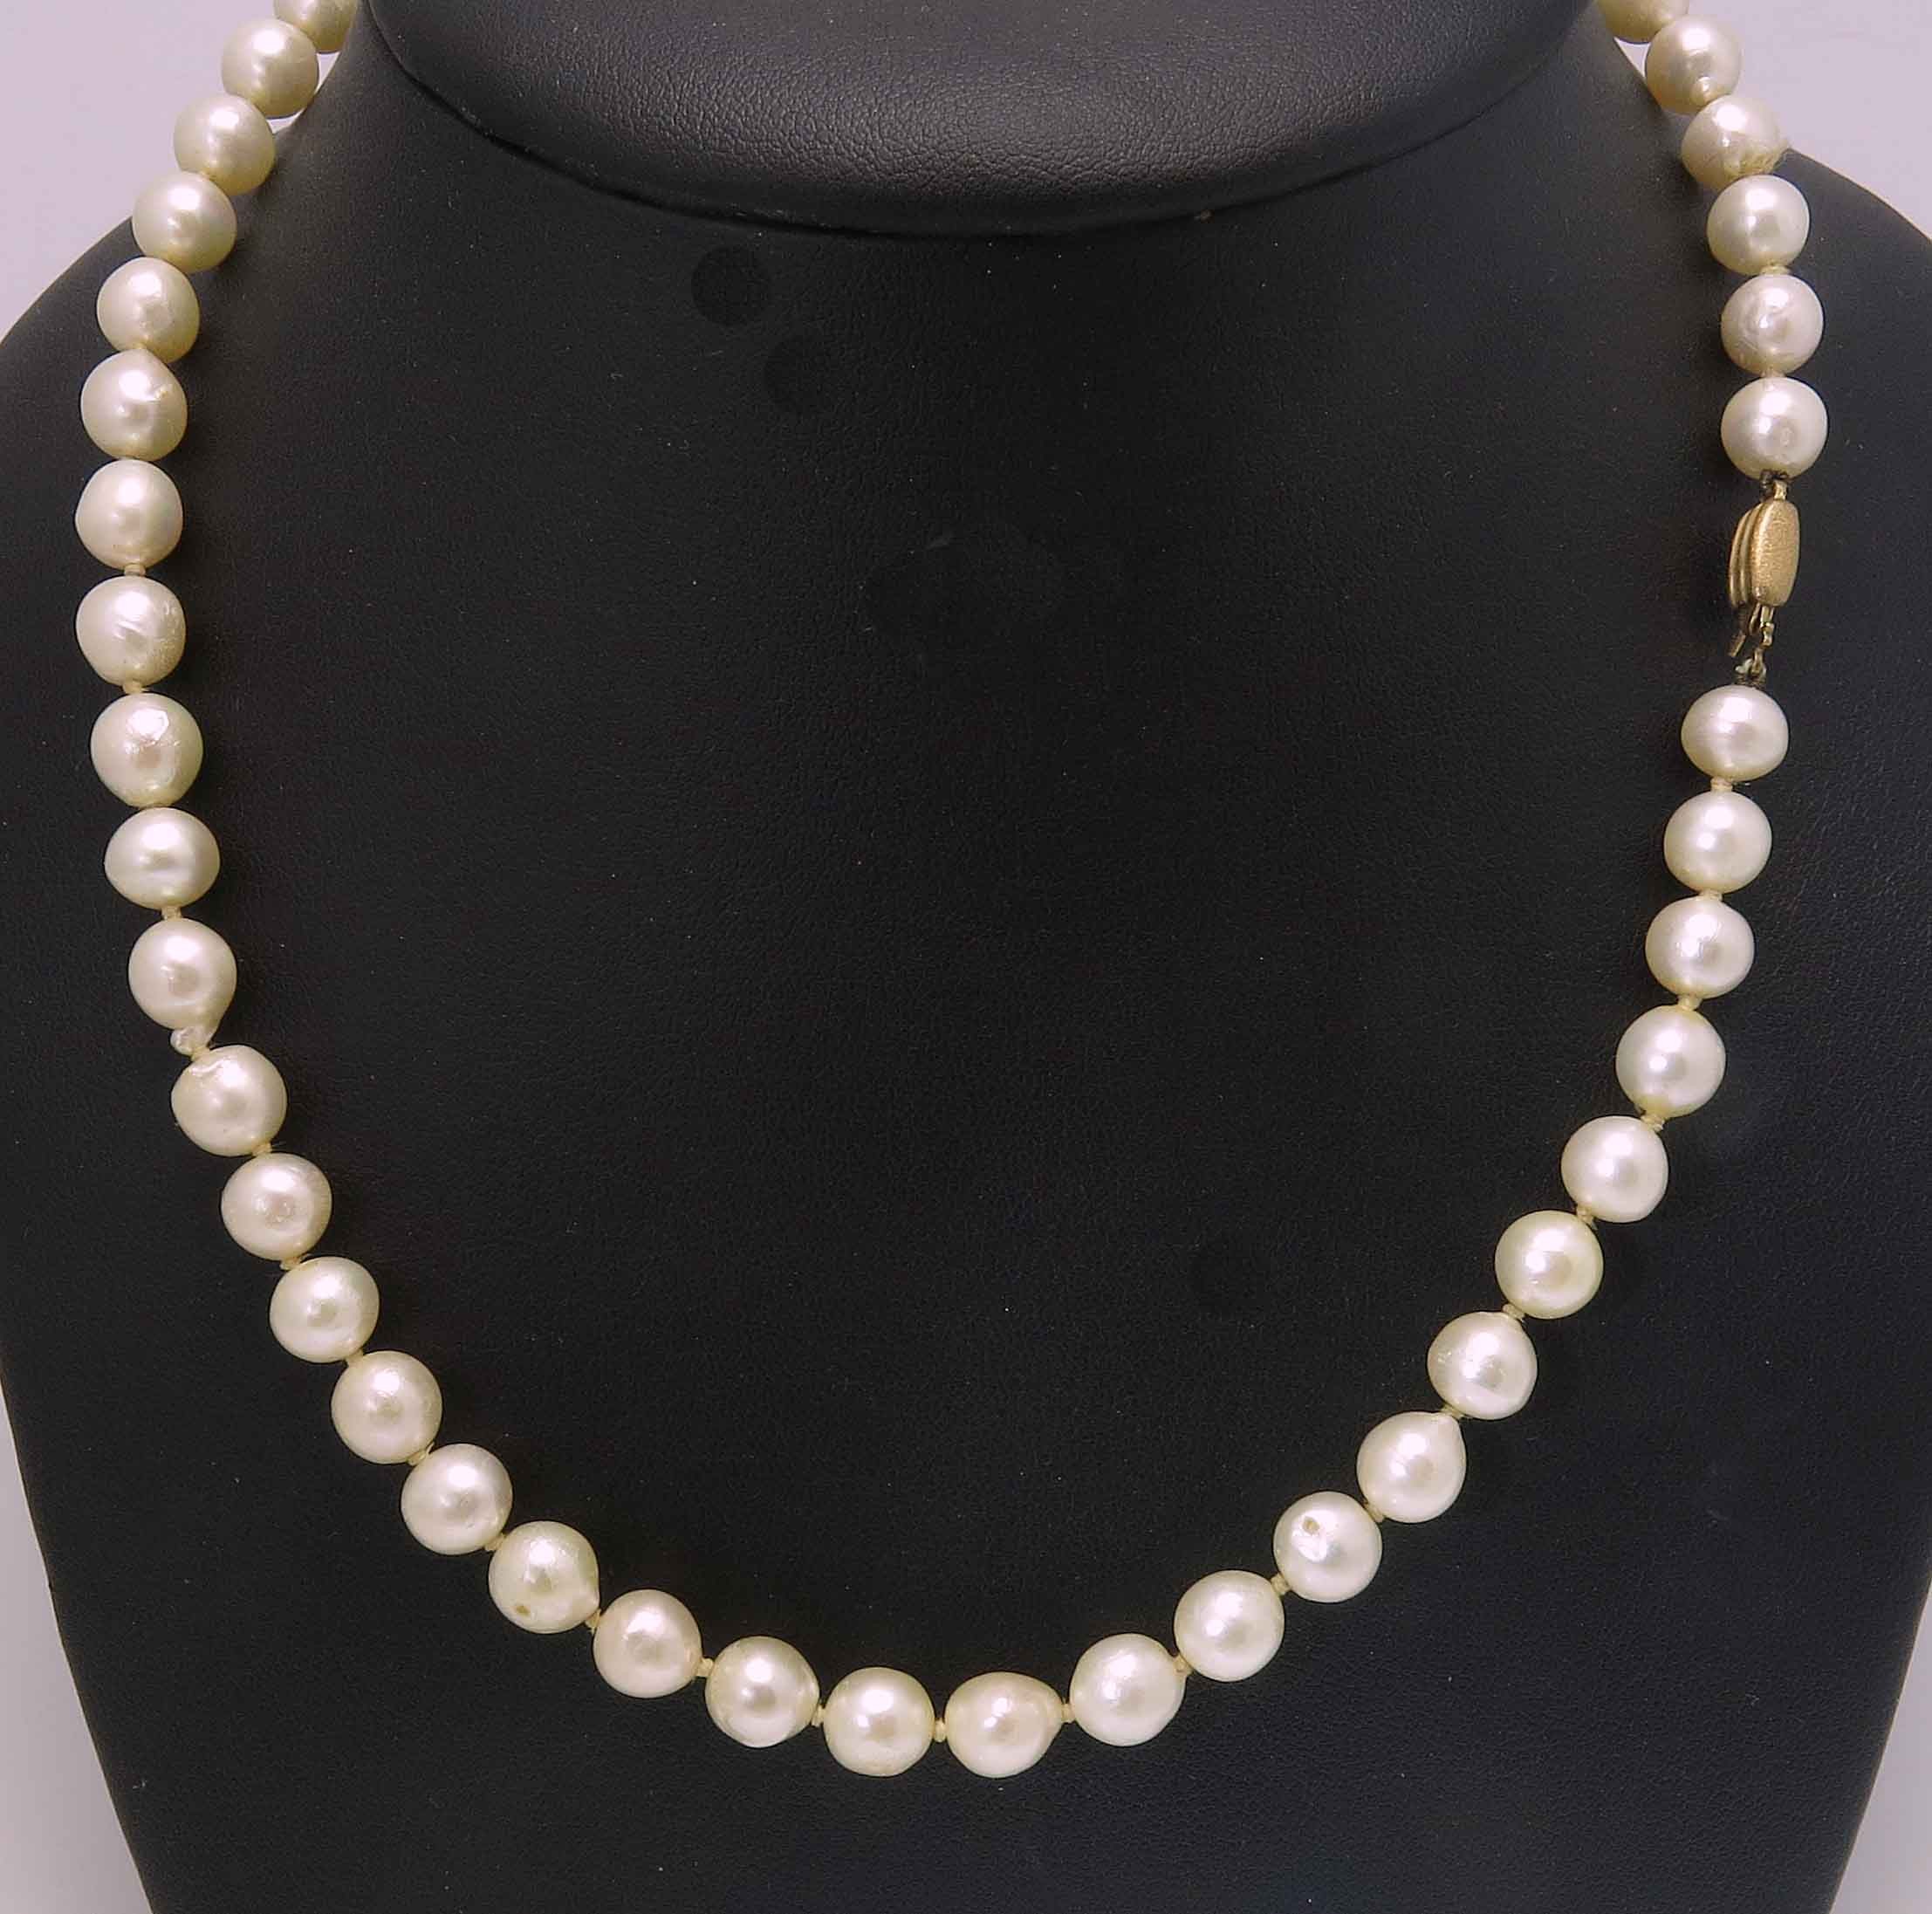 Pearl Necklace - Lot 895964 | ALLBIDS